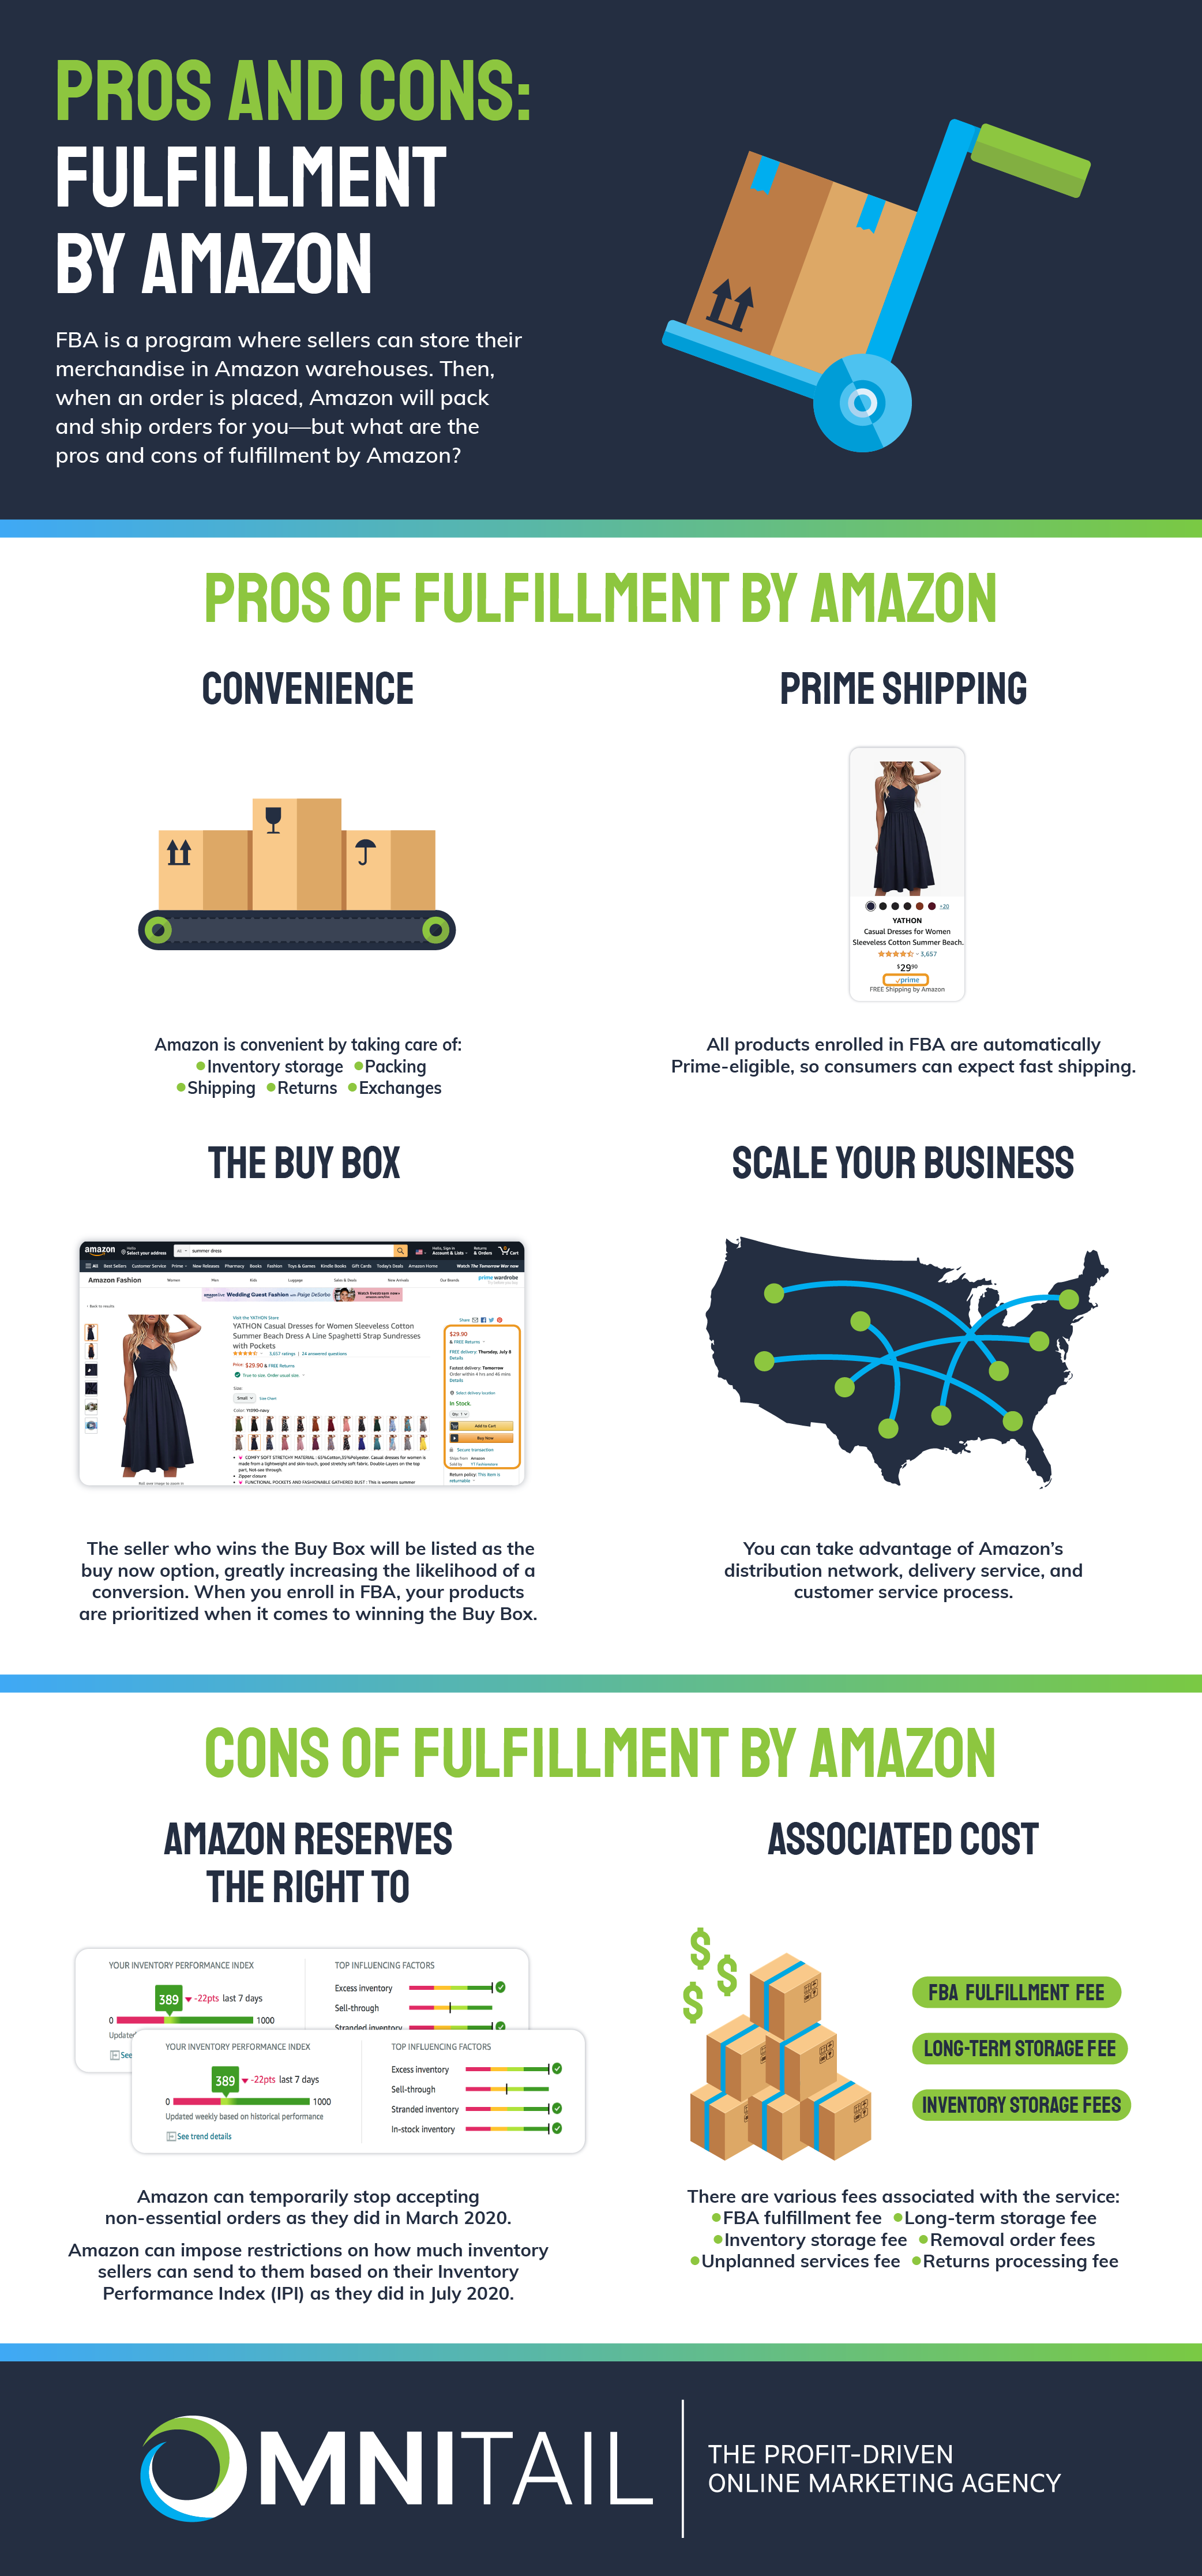 Fulfillment by Amazon (FBA) Pros and Cons [Infographic] Omnitail